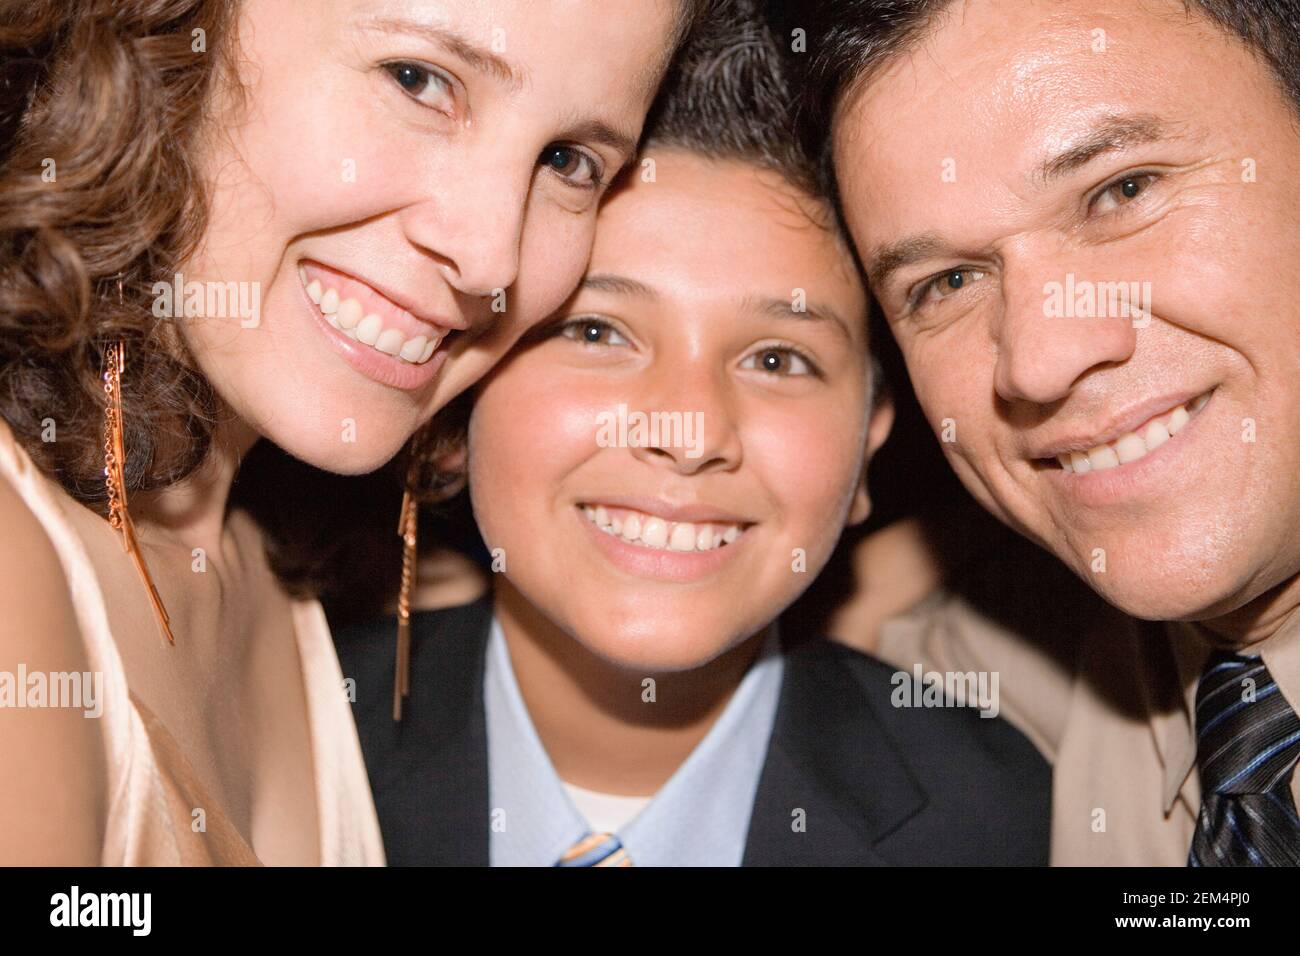 Portrait of a mature man and a mid adult woman smiling with their son Stock Photo